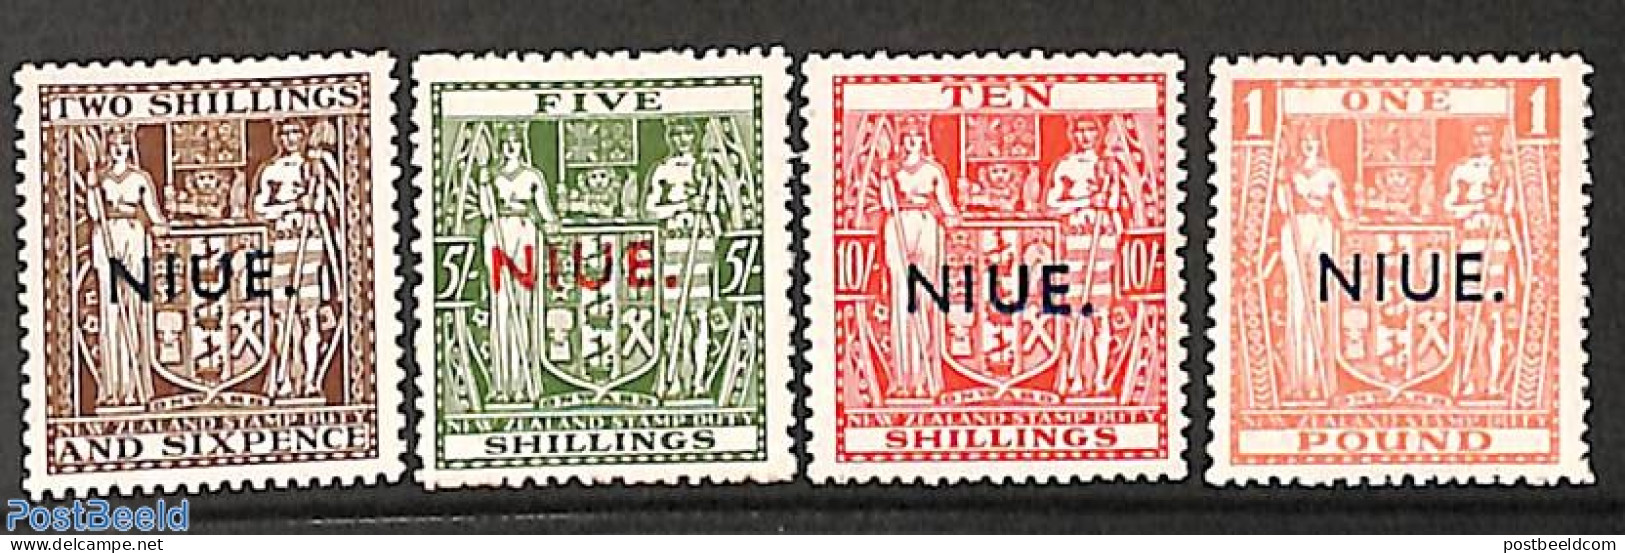 Niue 1942 Fiscal Stamps 4v (also Valid For Postage), Unused (hinged) - Niue